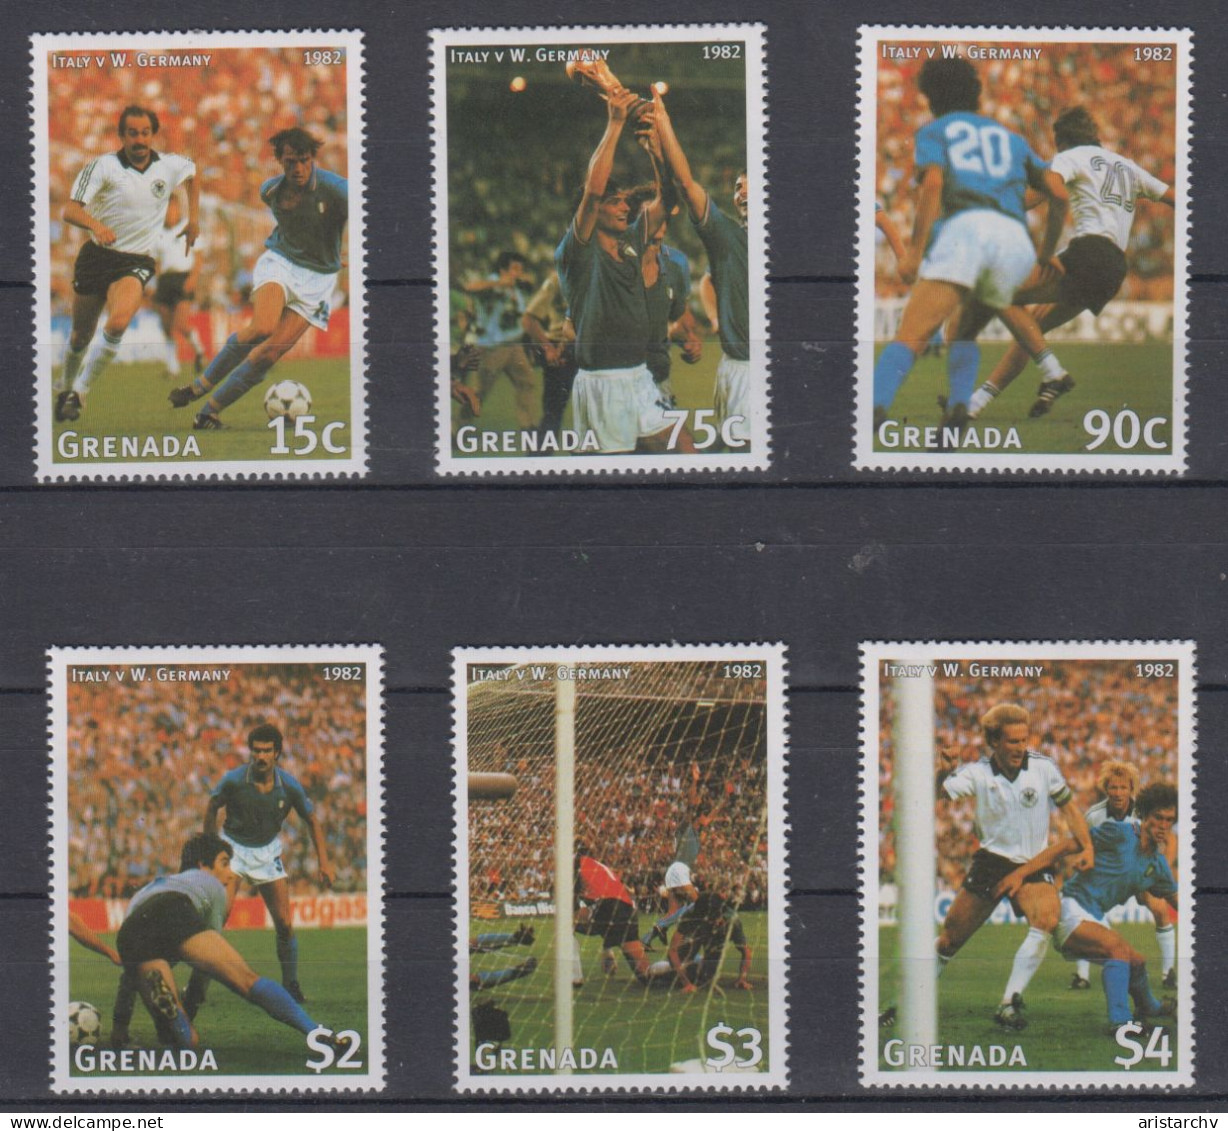 GRENADA 1998 FOOTBALL WORLD CUP 2 S/SHEETS 2 SHEETLETS AND 6 STAMPS - 1998 – Frankreich